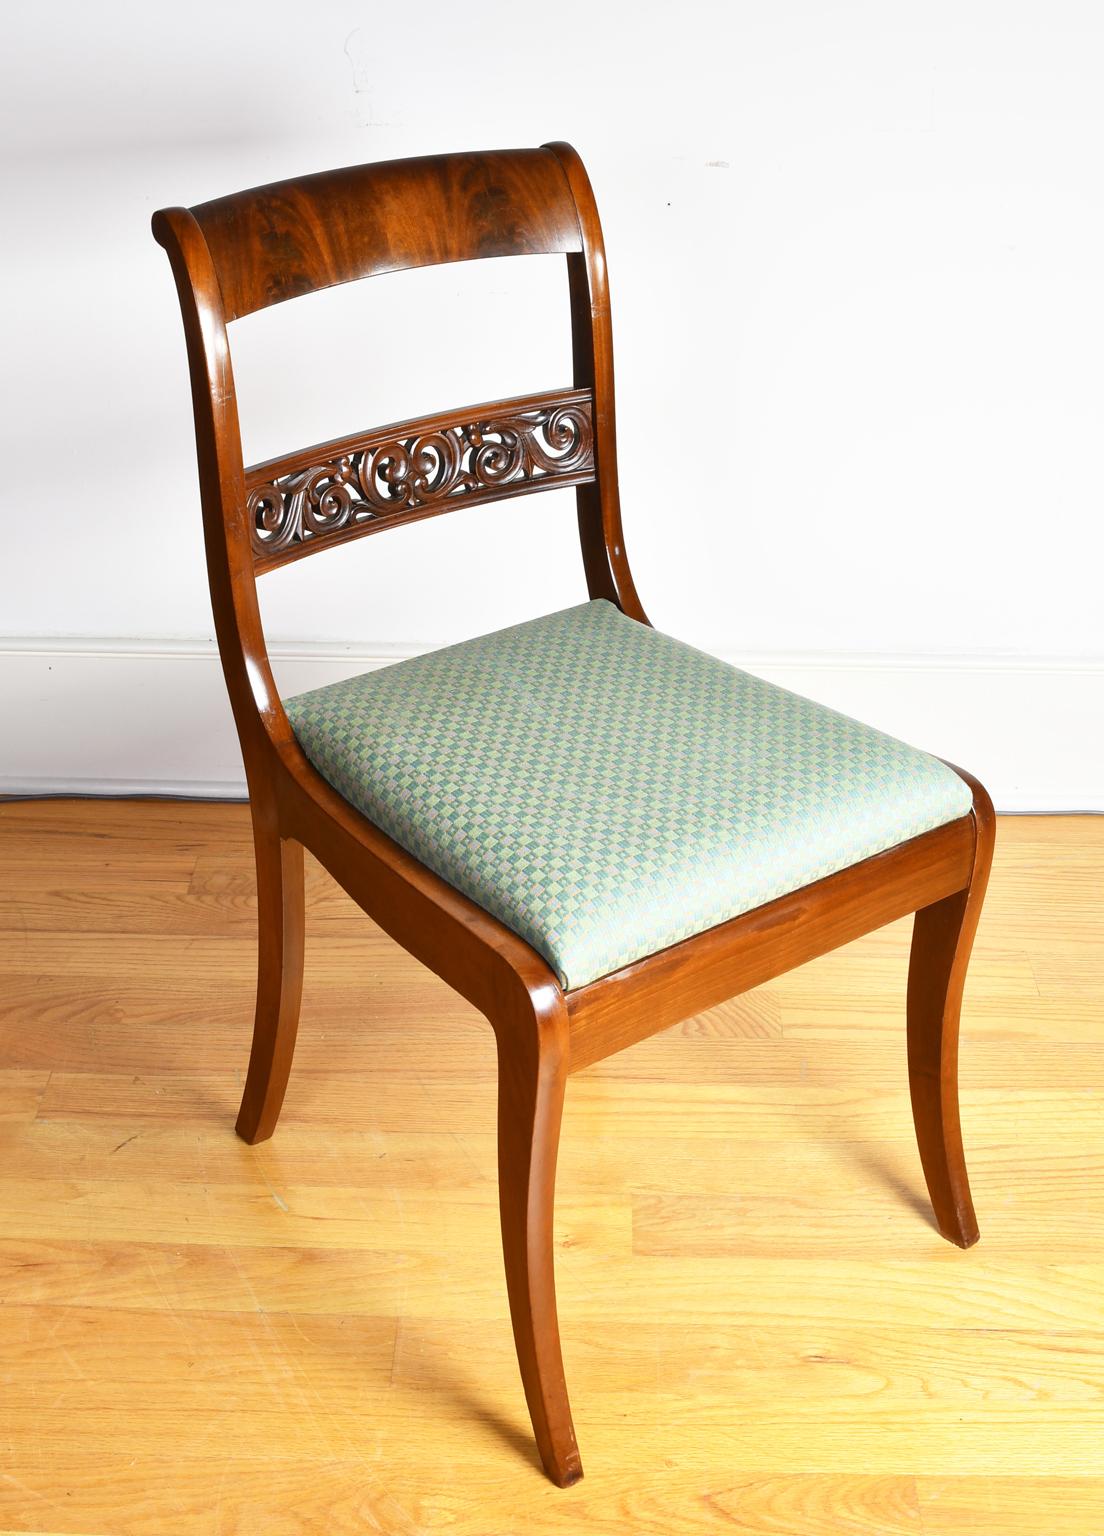 Set of 11 Antique Dining Chairs with 9 Sides & 2 Arms in West Indies Mahogany For Sale 11